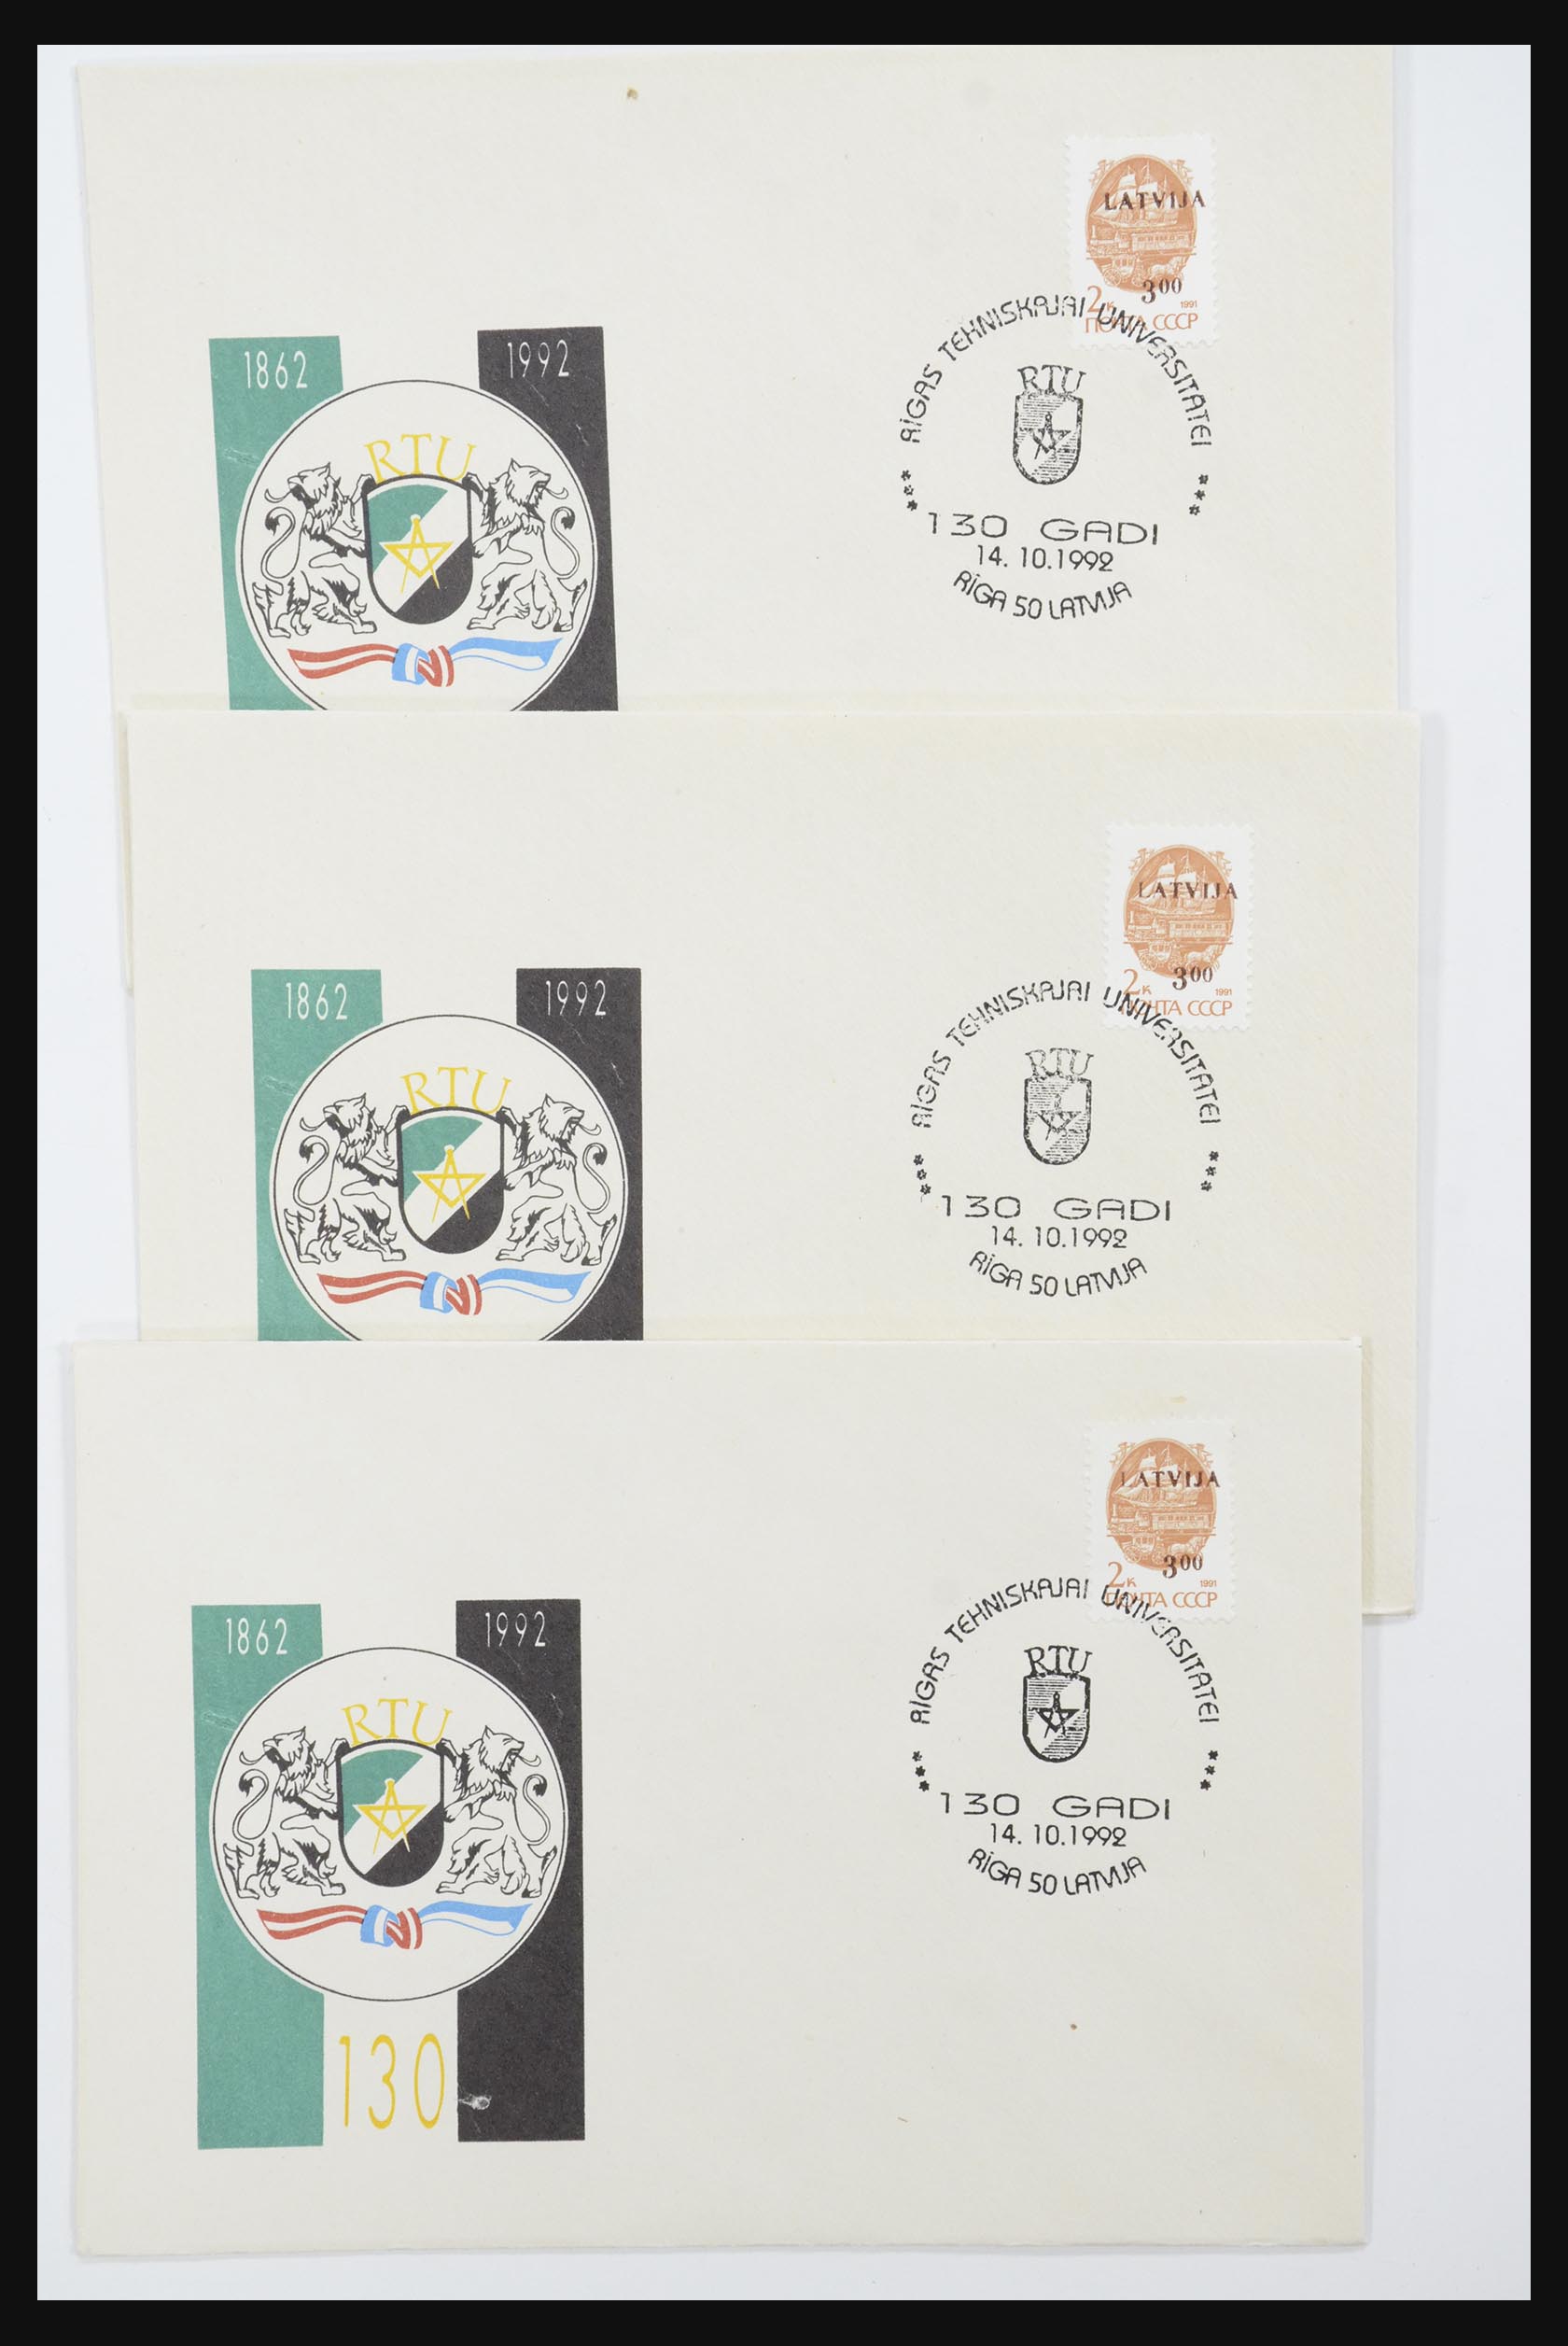 31584 625 - 31584 Latvia covers/FDC's and postal stationeries 1990-1992.